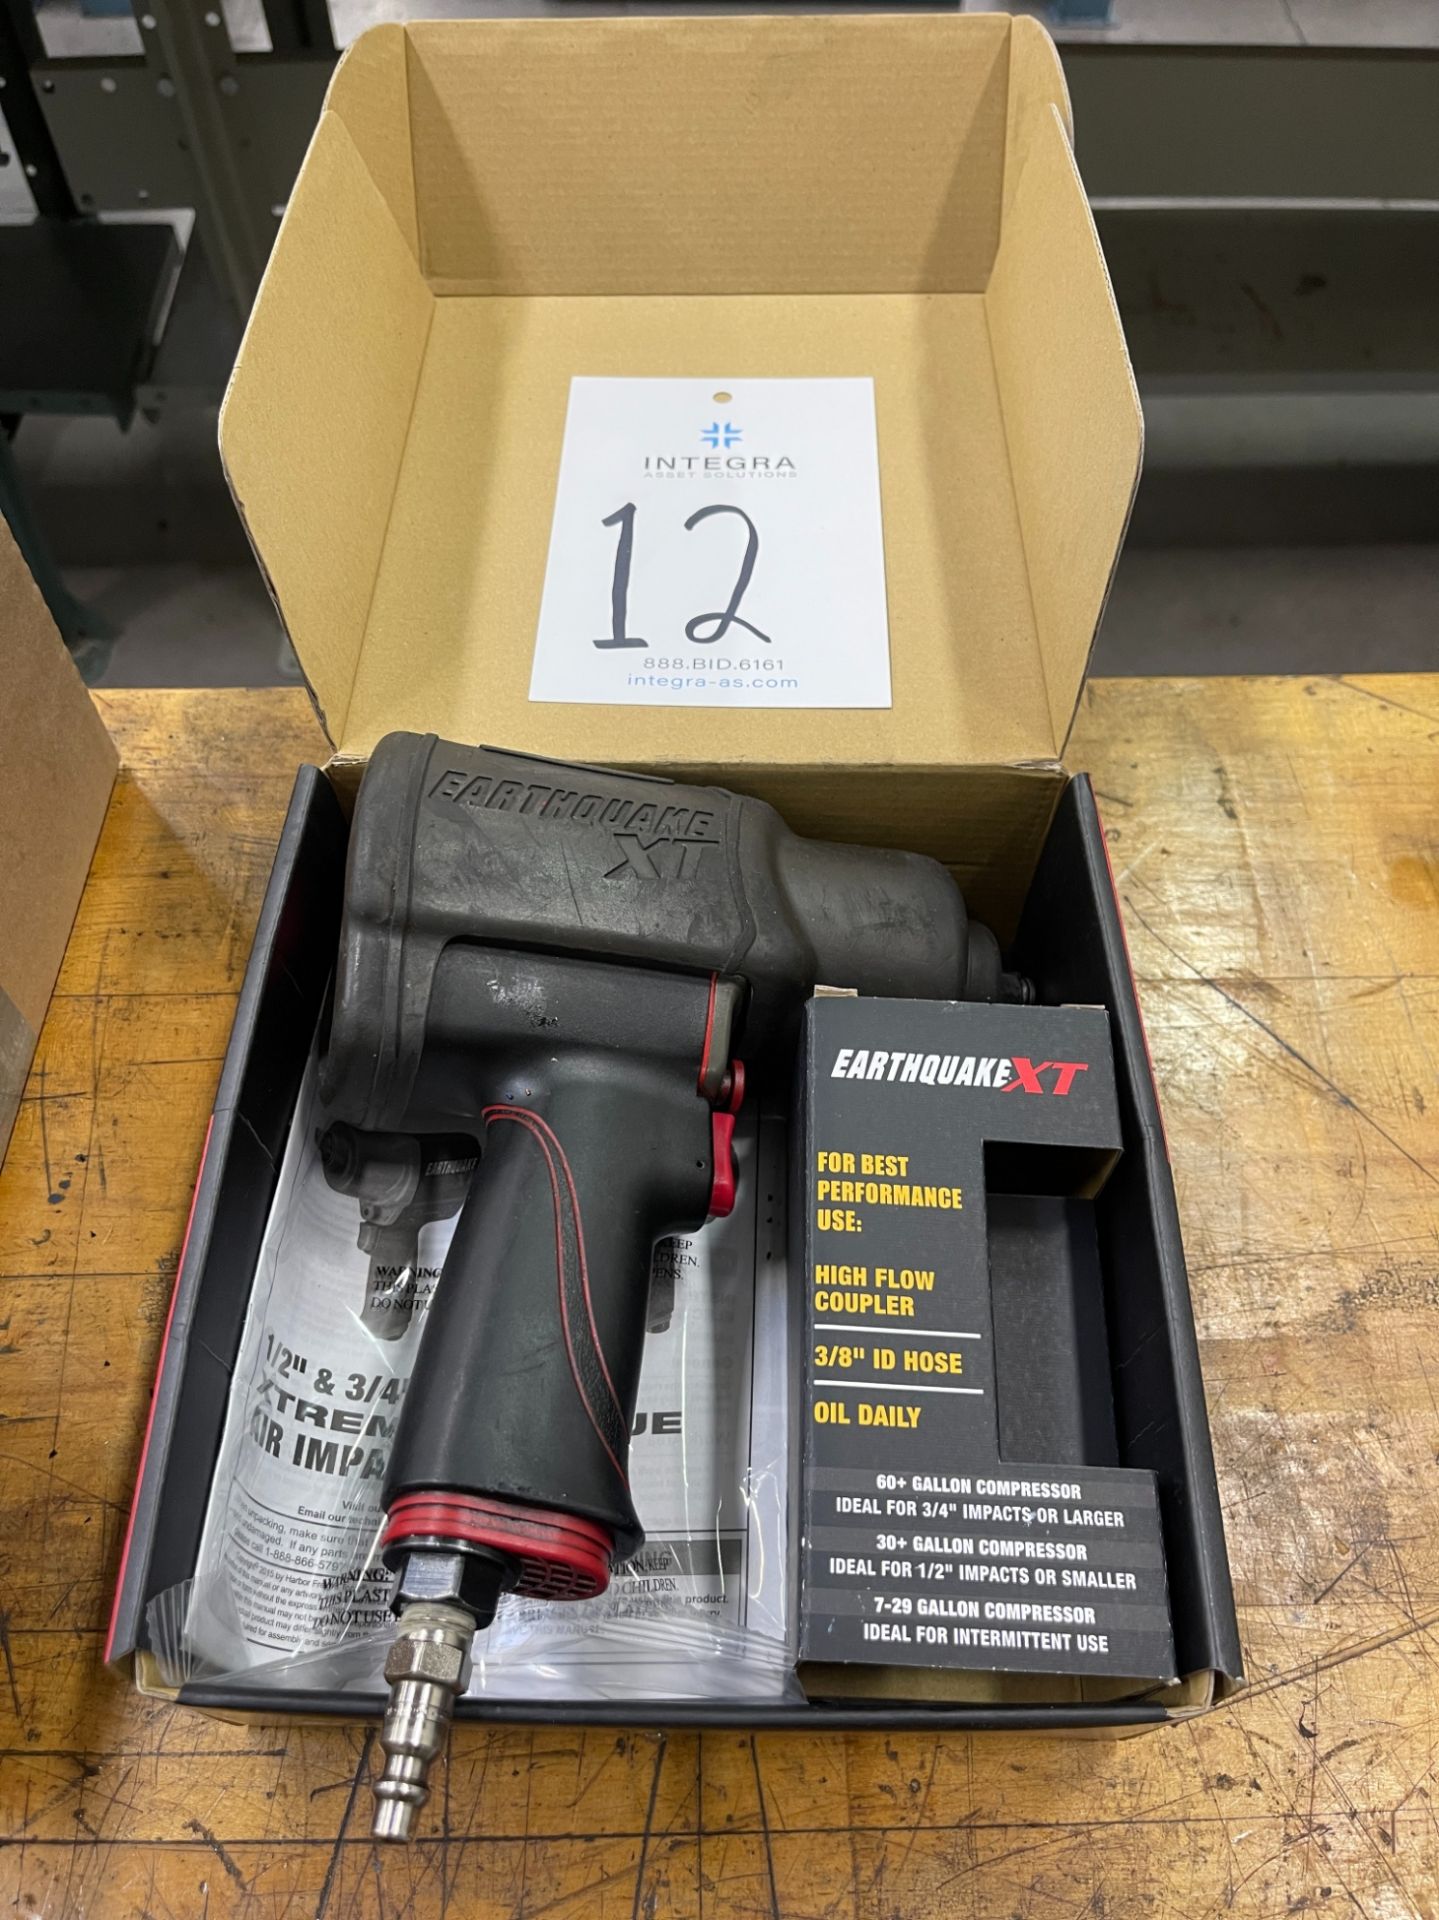 New Earthquake Pneumatic Impact Wrench